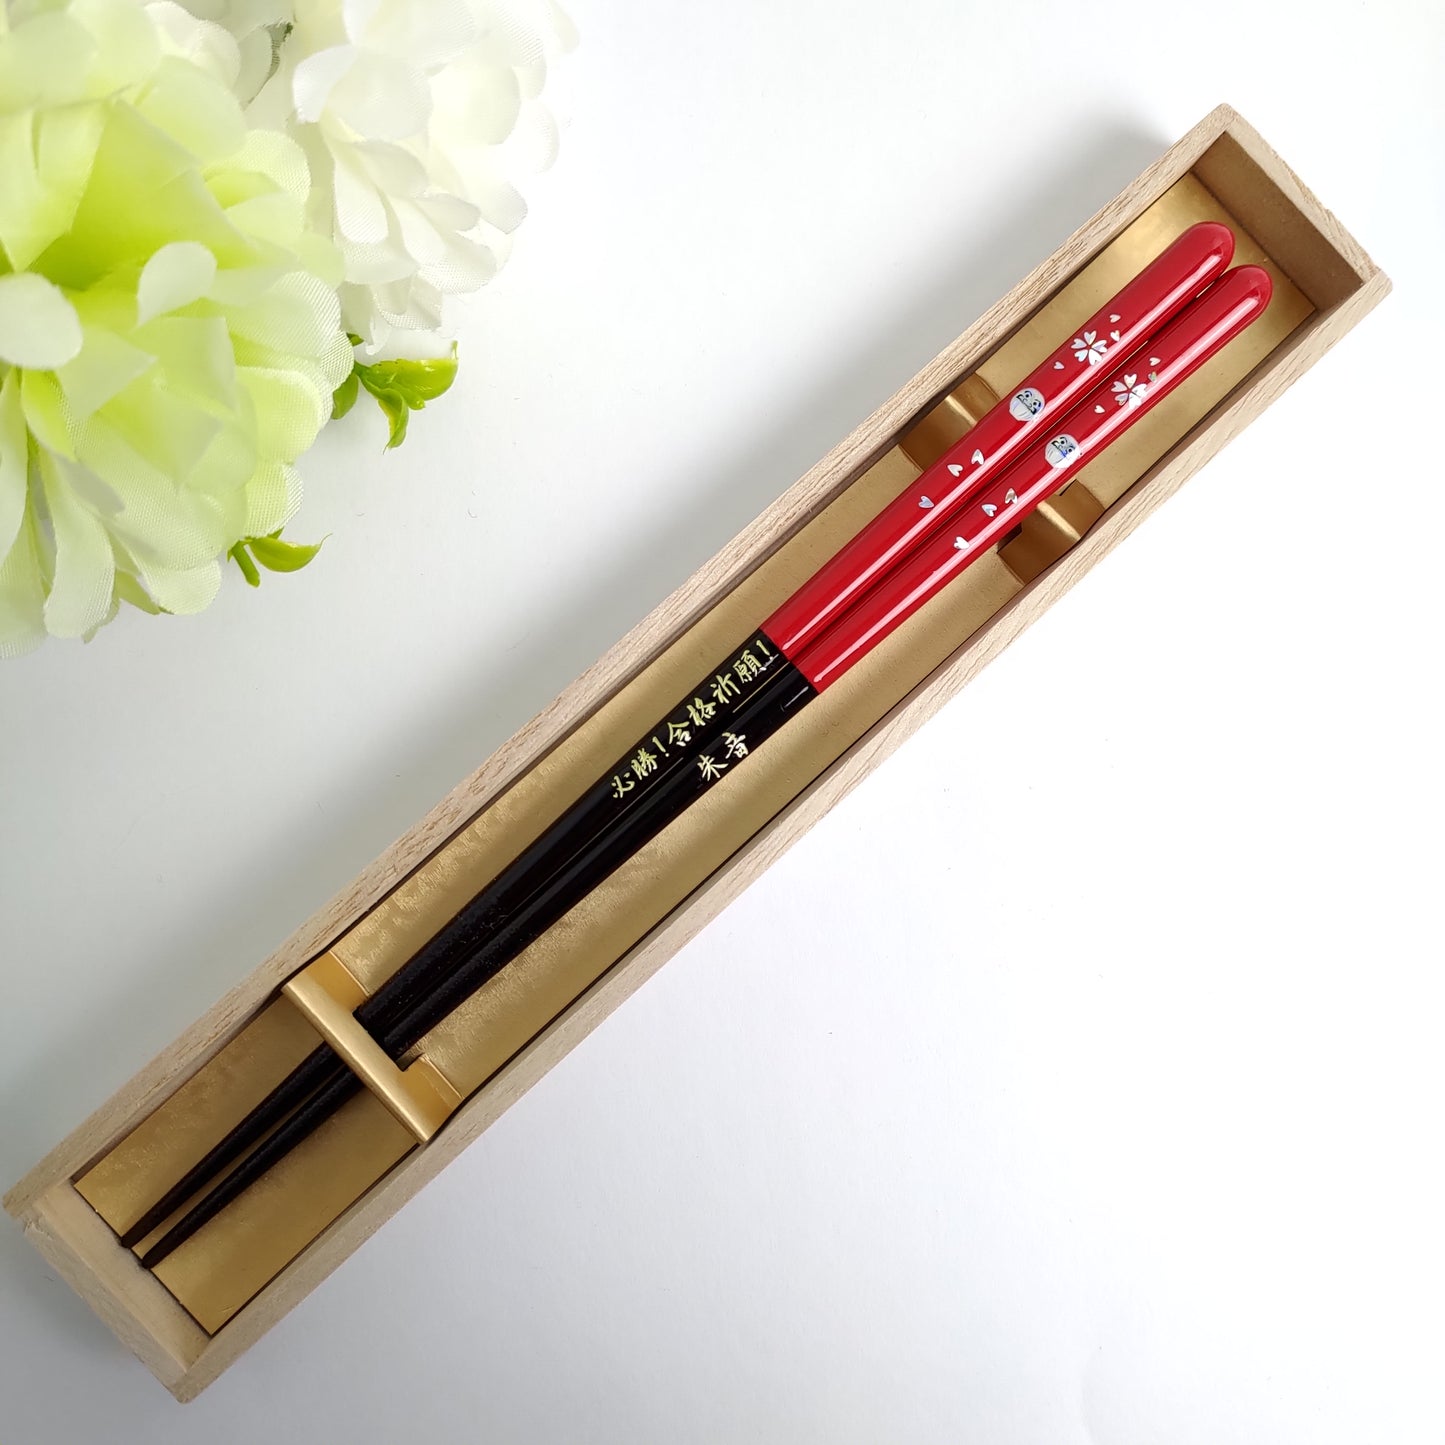 Lucky charm Daruma Japanese chopsticks white red - SINGLE PAIR WITH ENGRAVED WOODEN BOX SET